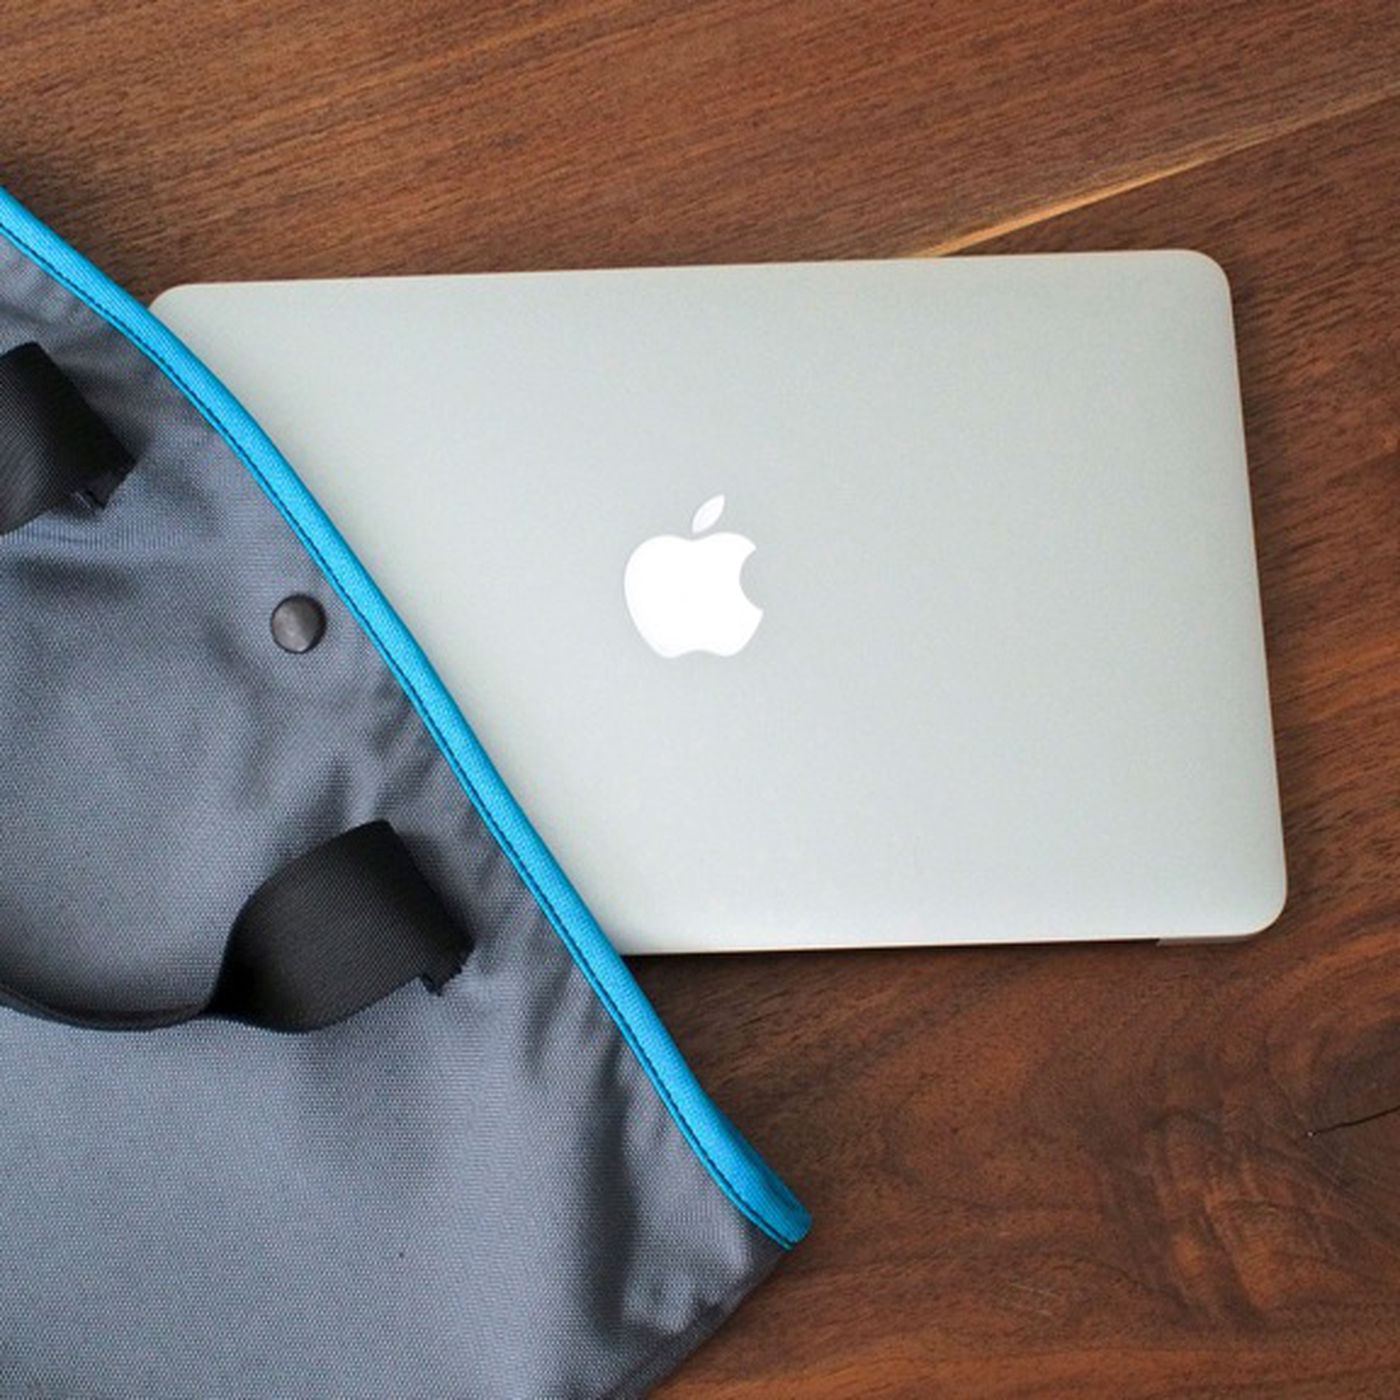 11 Inch Macbook Air Review Living With Apple S Smallest Laptop The Verge